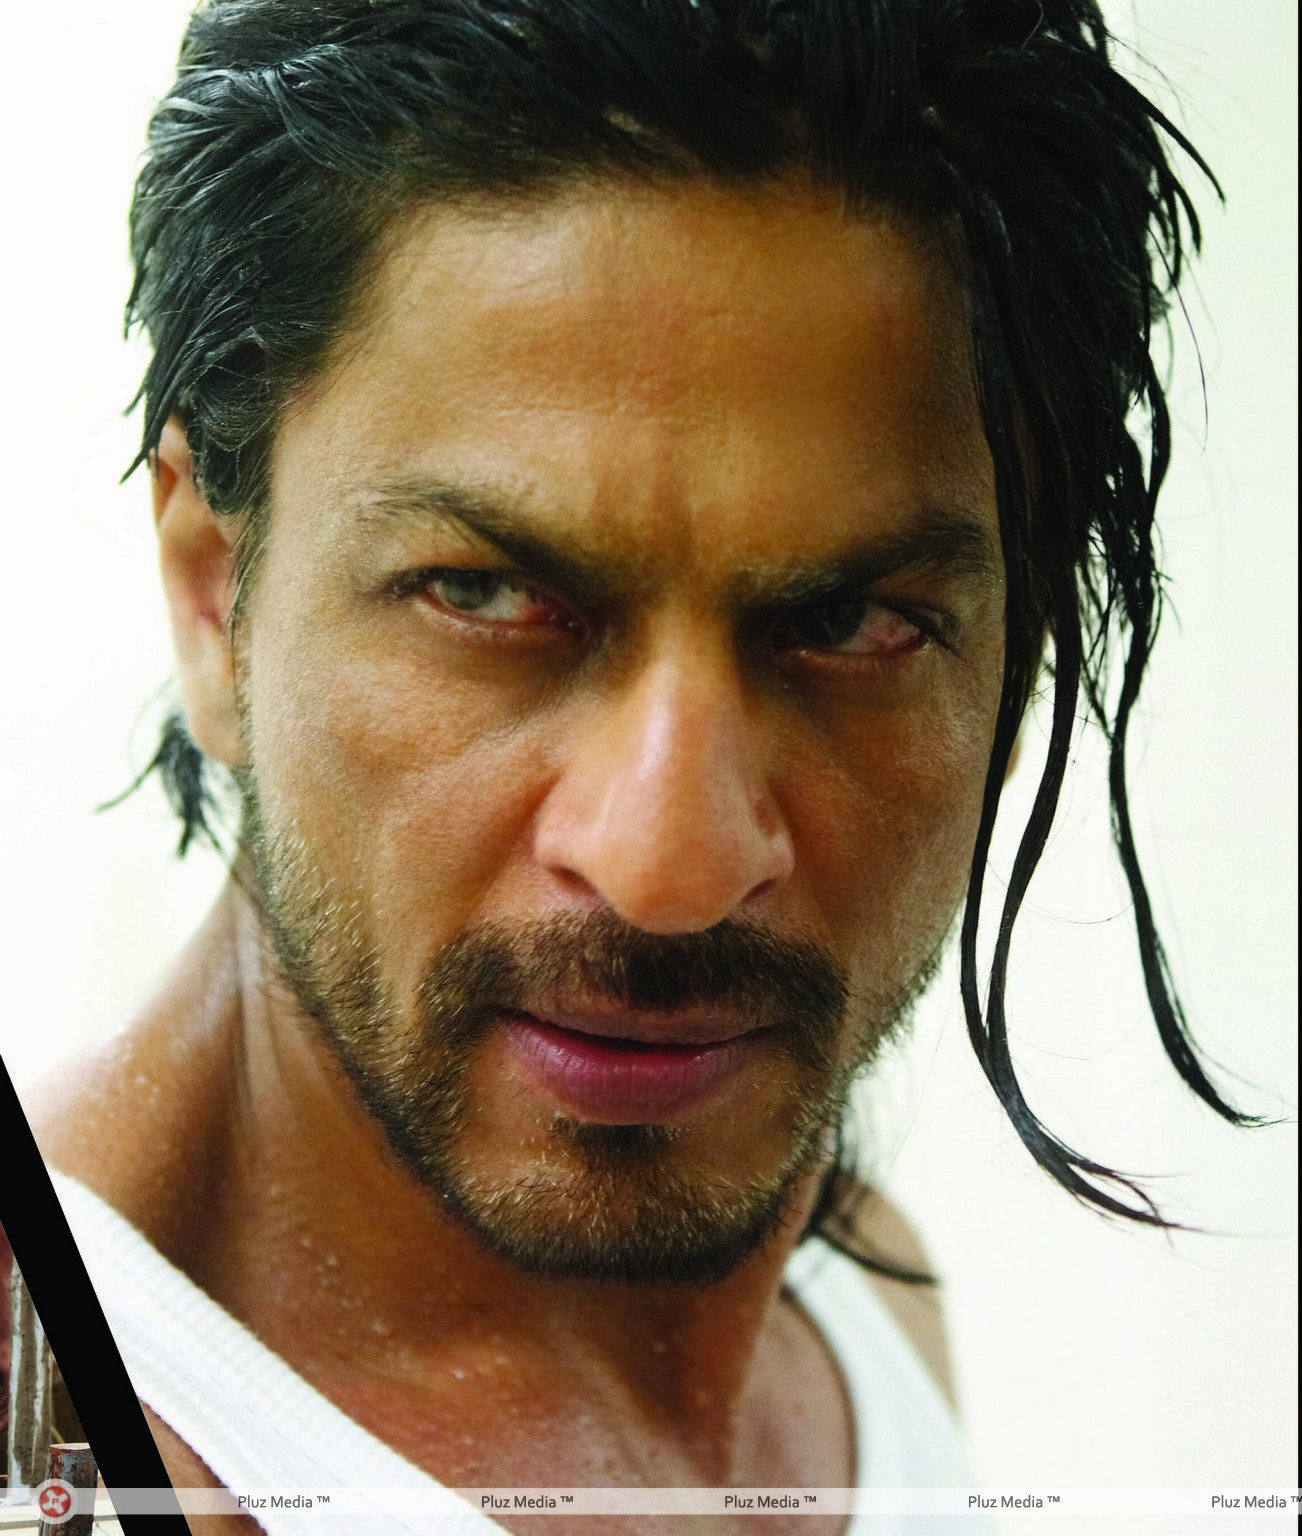 Shah Rukh Khans rugged look from the movie Don 2